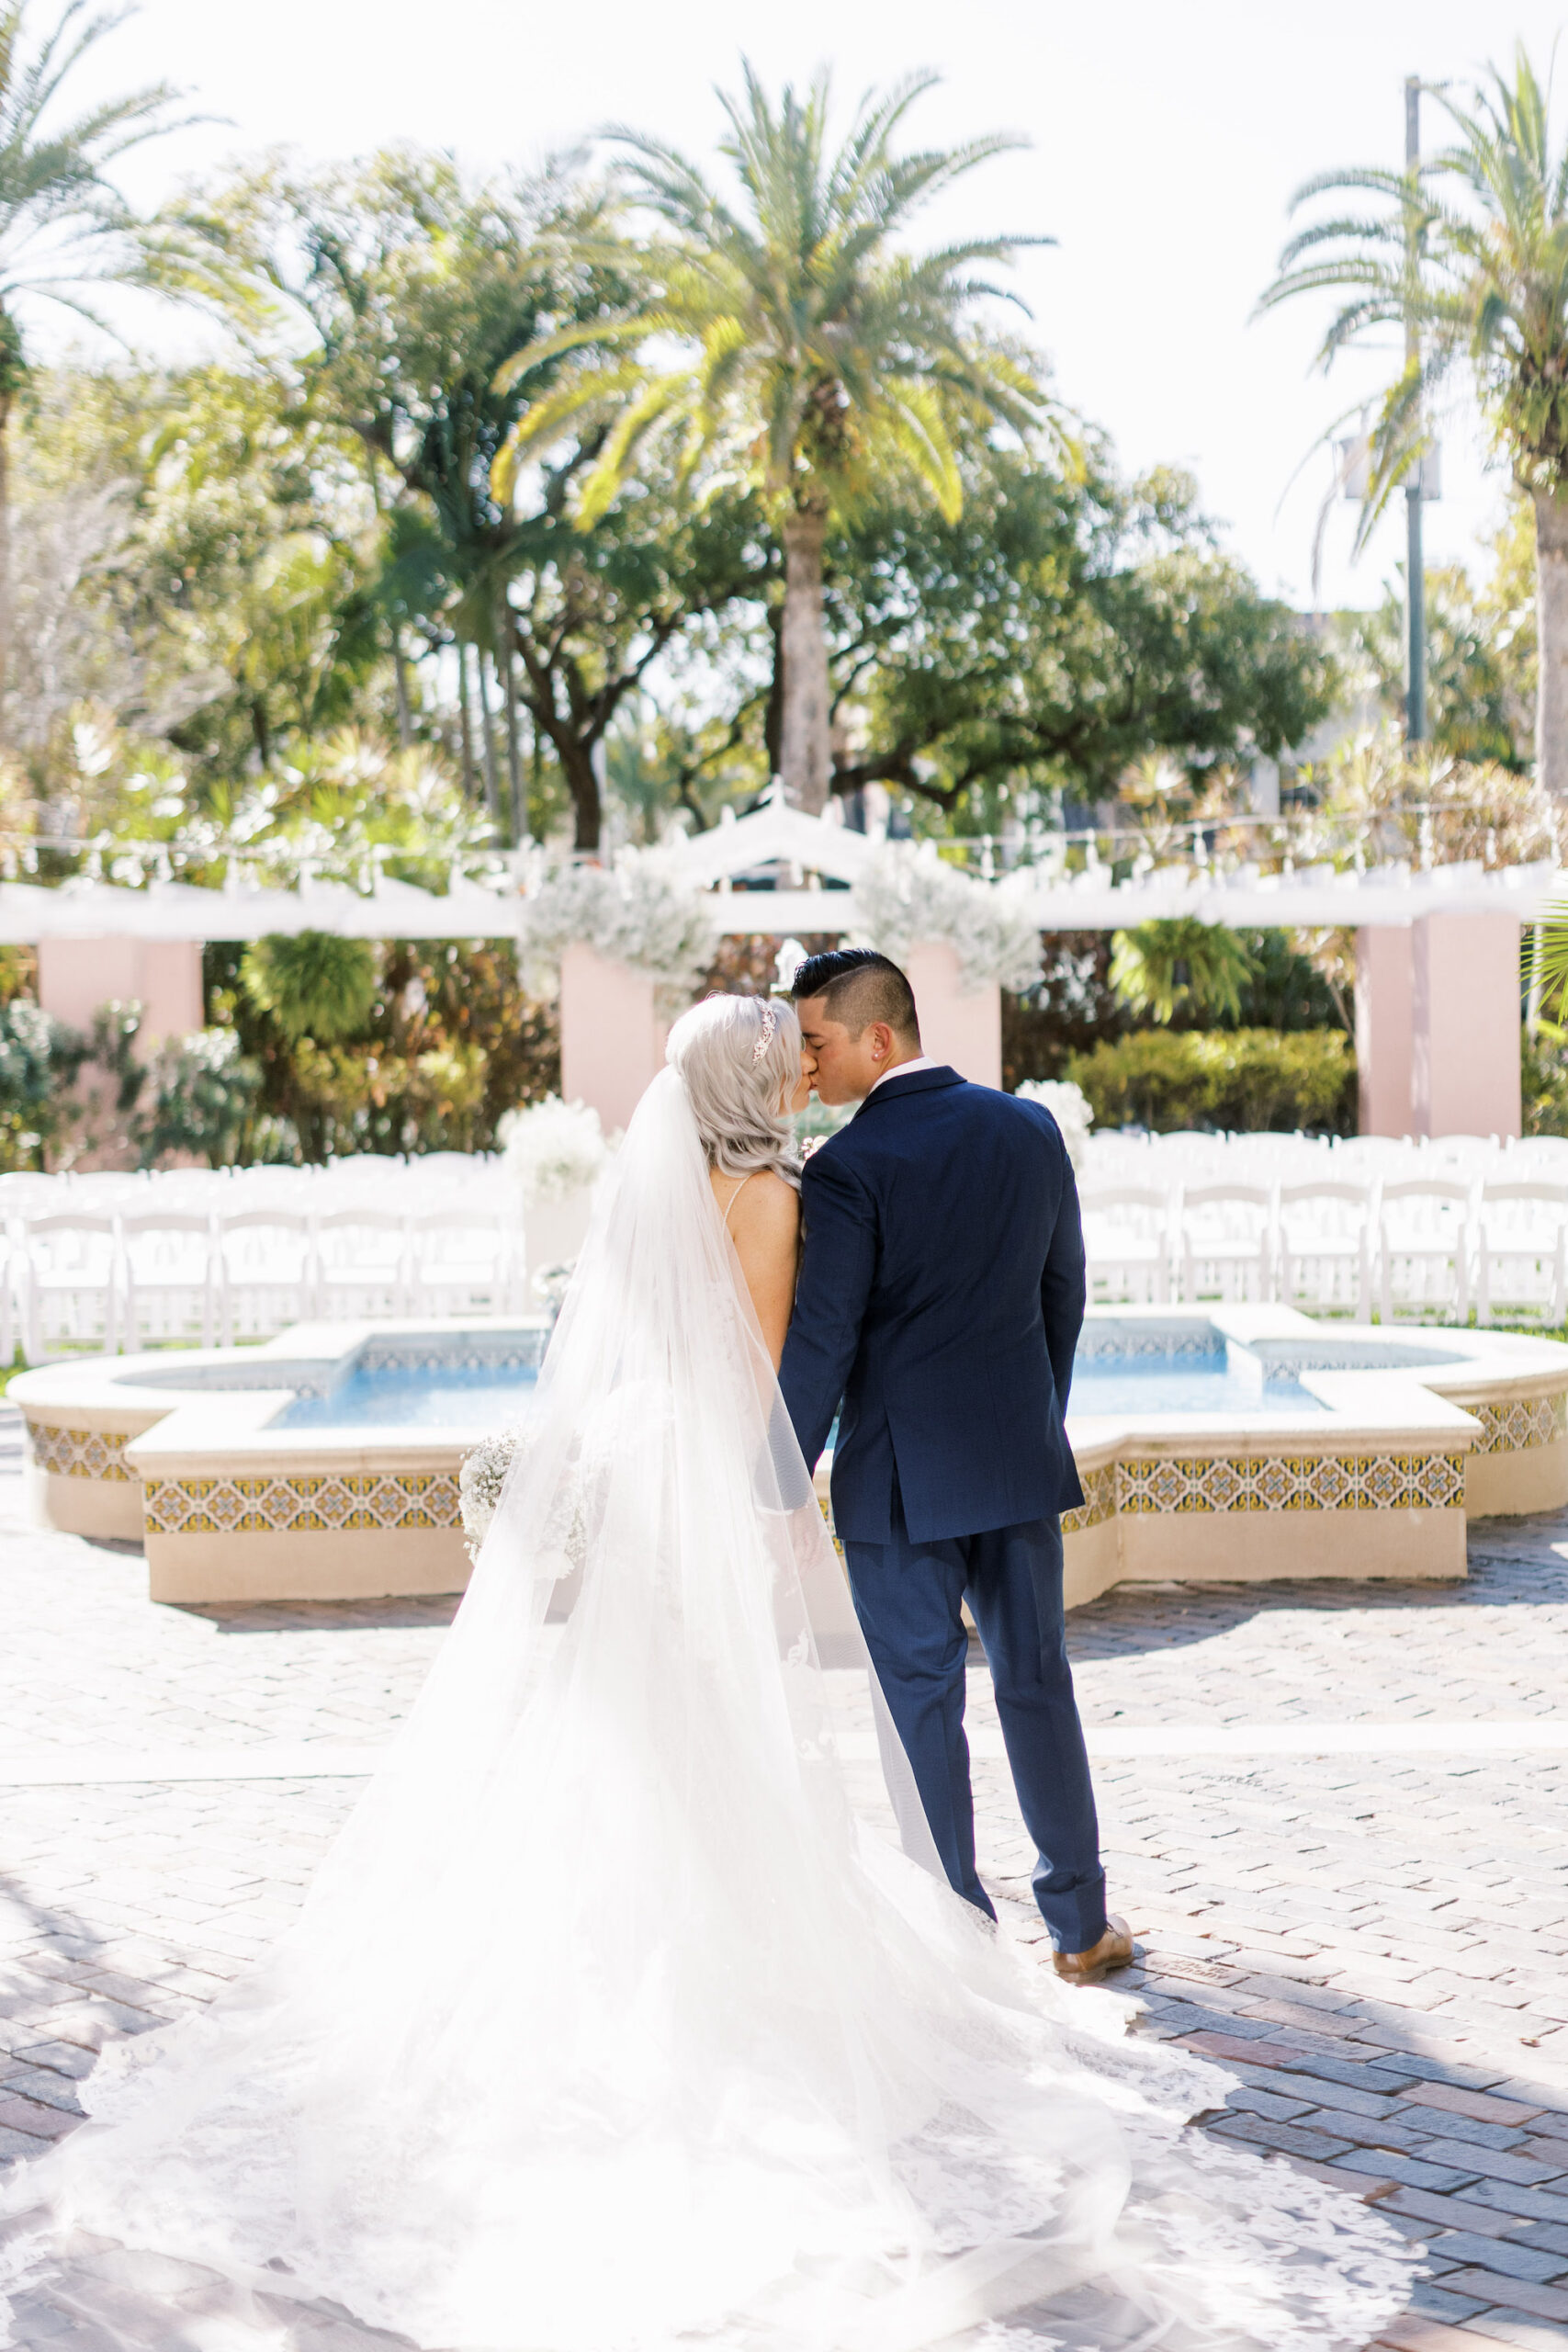 Romantic First Look Kiss Outdoor Courtyard Ceremony Fountain | St. Pete Wedding Venue The Vinoy Resort & Golf Club | Planner Parties a la Carte